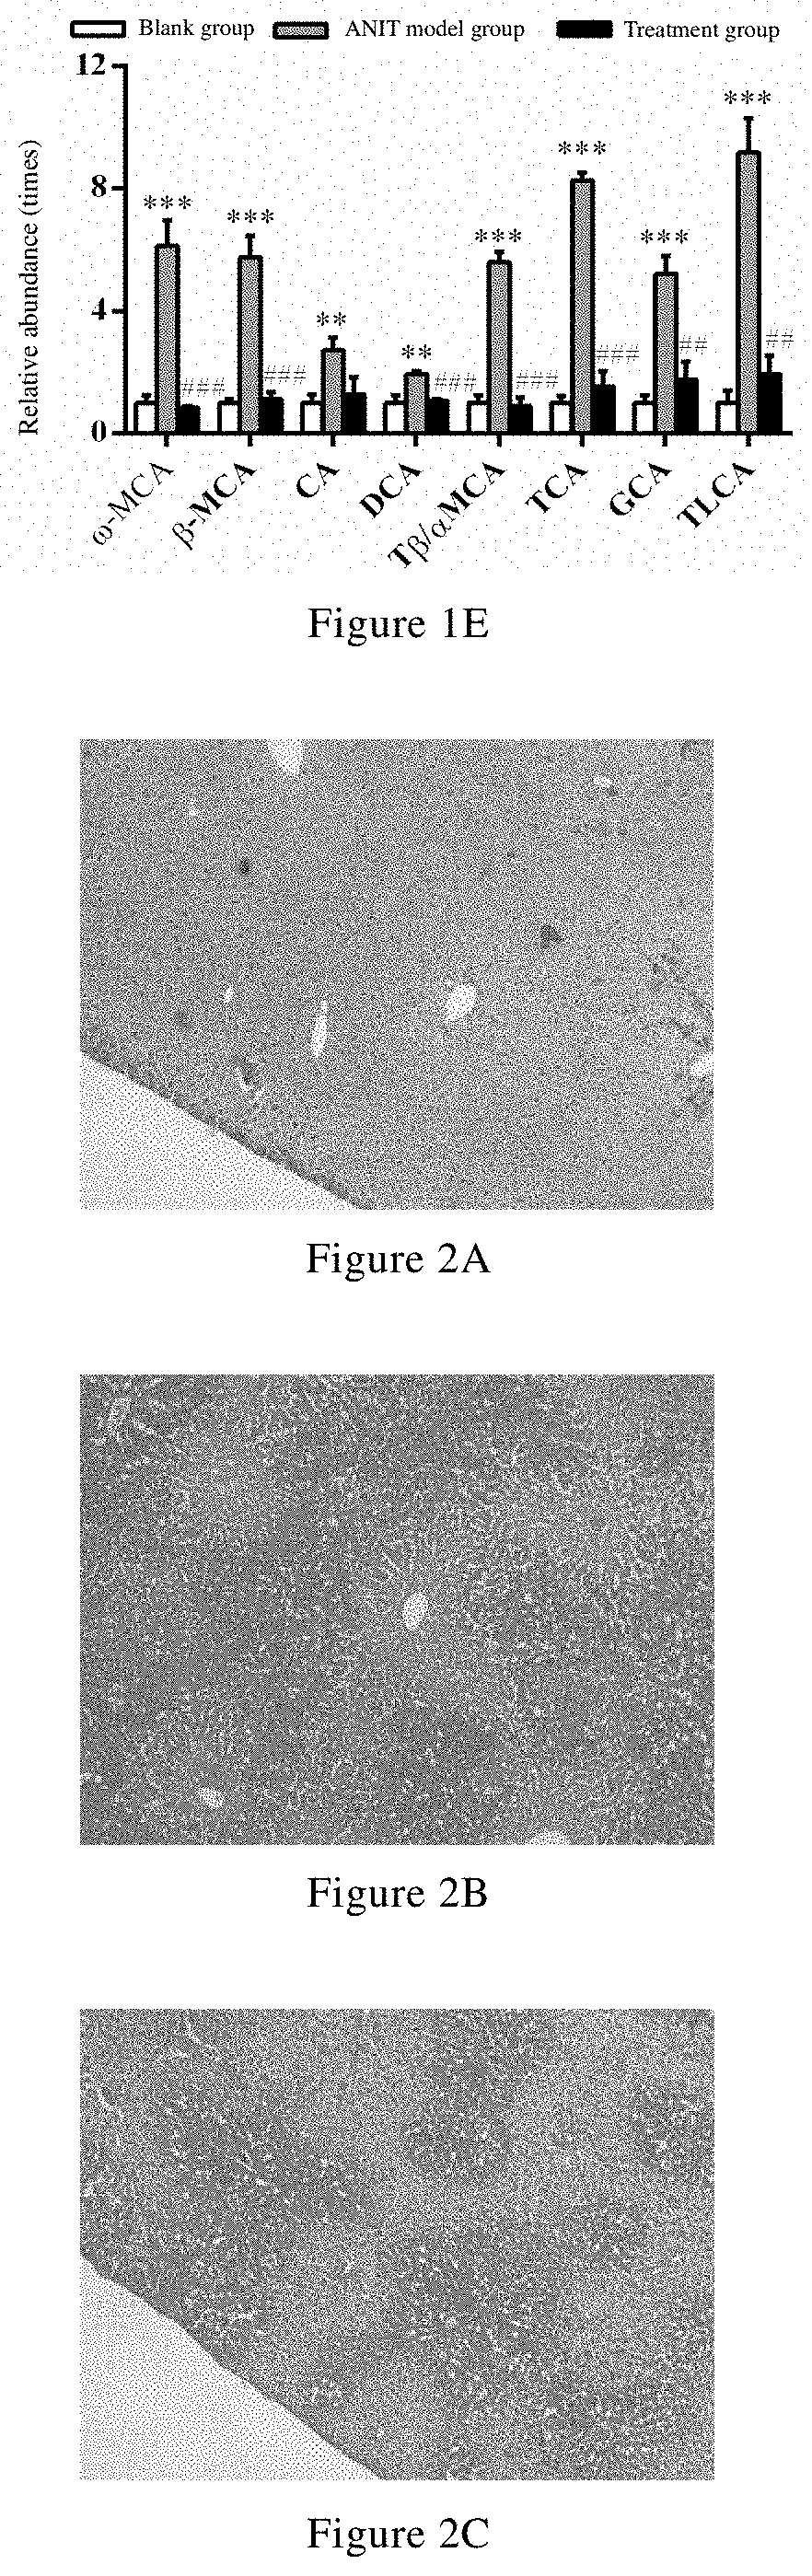 Uses of celastrol in preventing and/or treating cholestatic liver disease and liver fibrosis